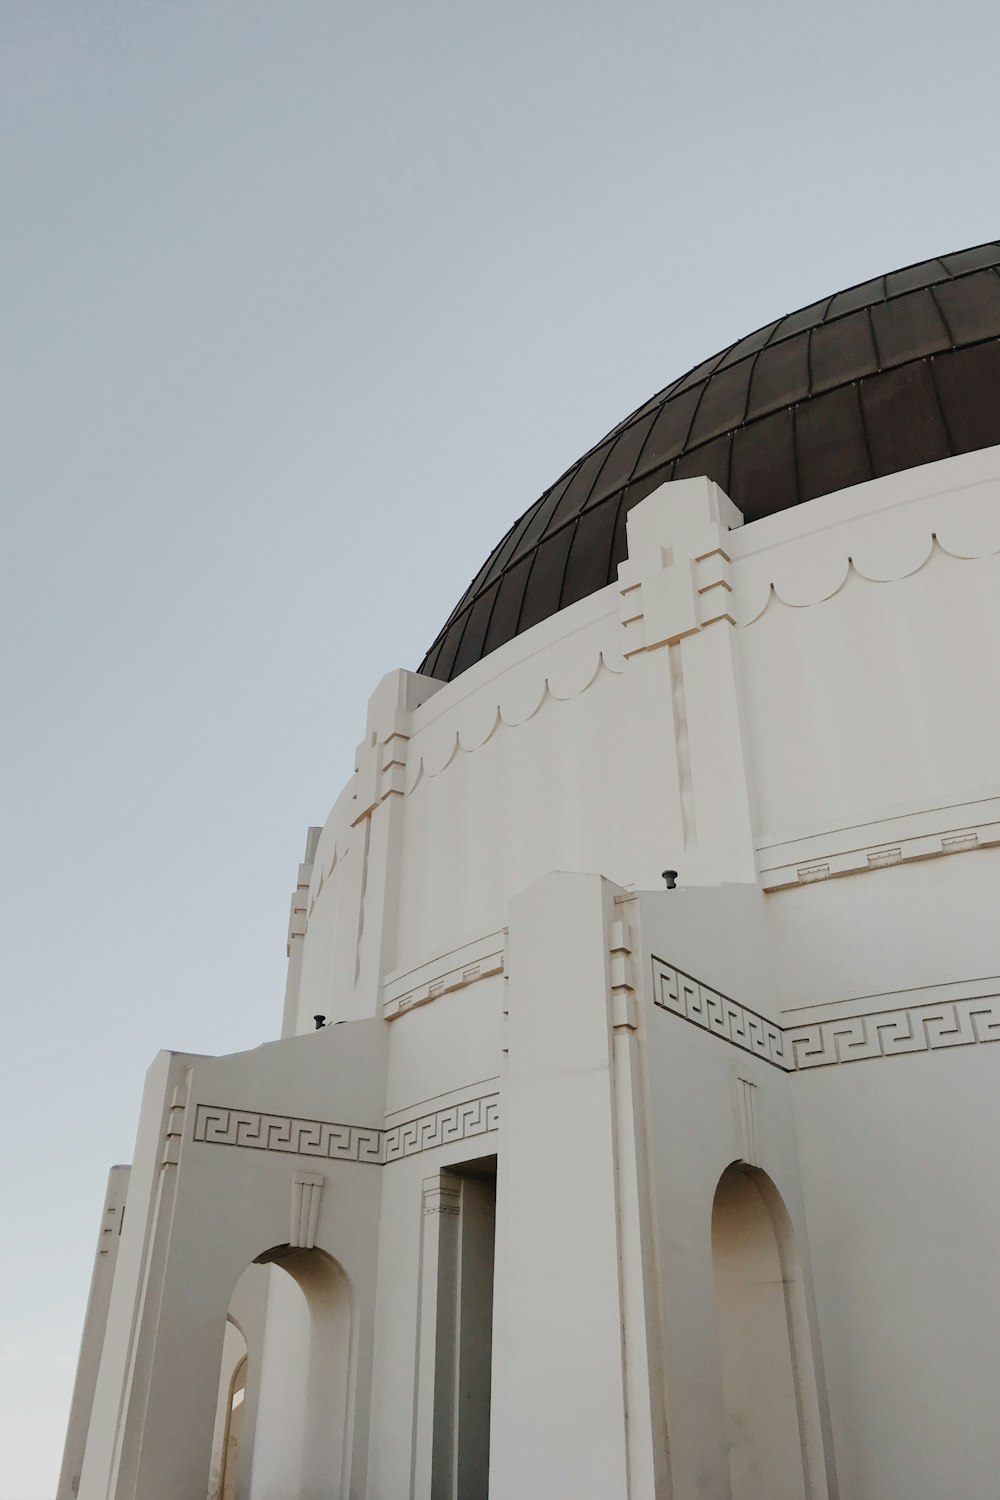 a large white building with a dome on top